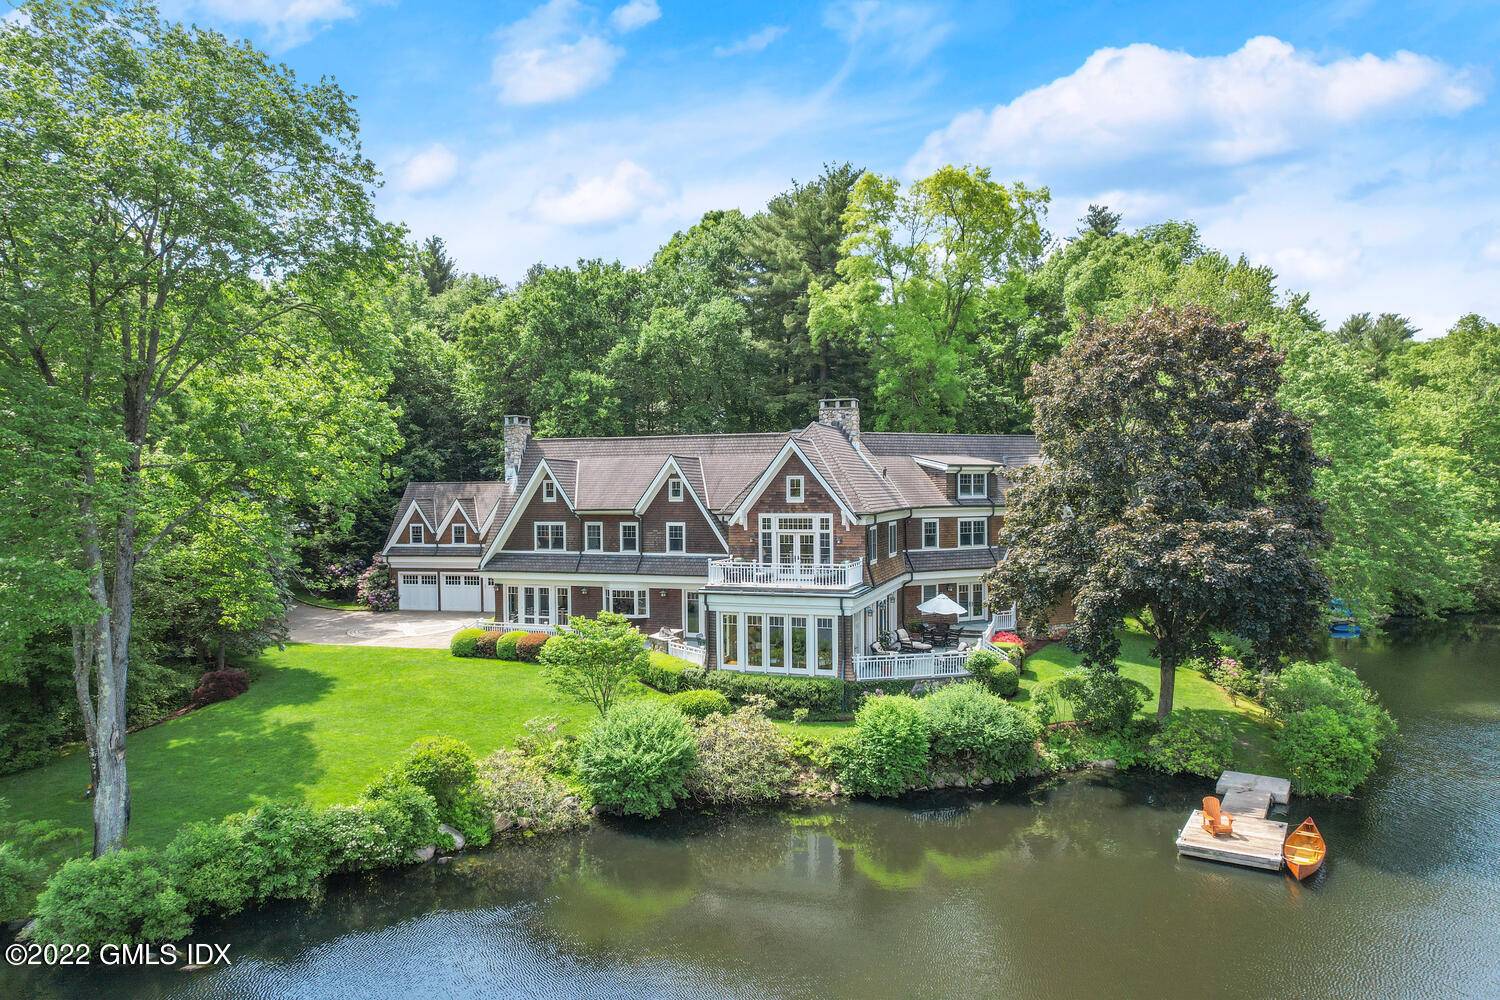 Lake side living at its finest with 400' frontage on 11 acre Frye Lake as featured in ''The Big Wedding'', staring Robert De Niro.